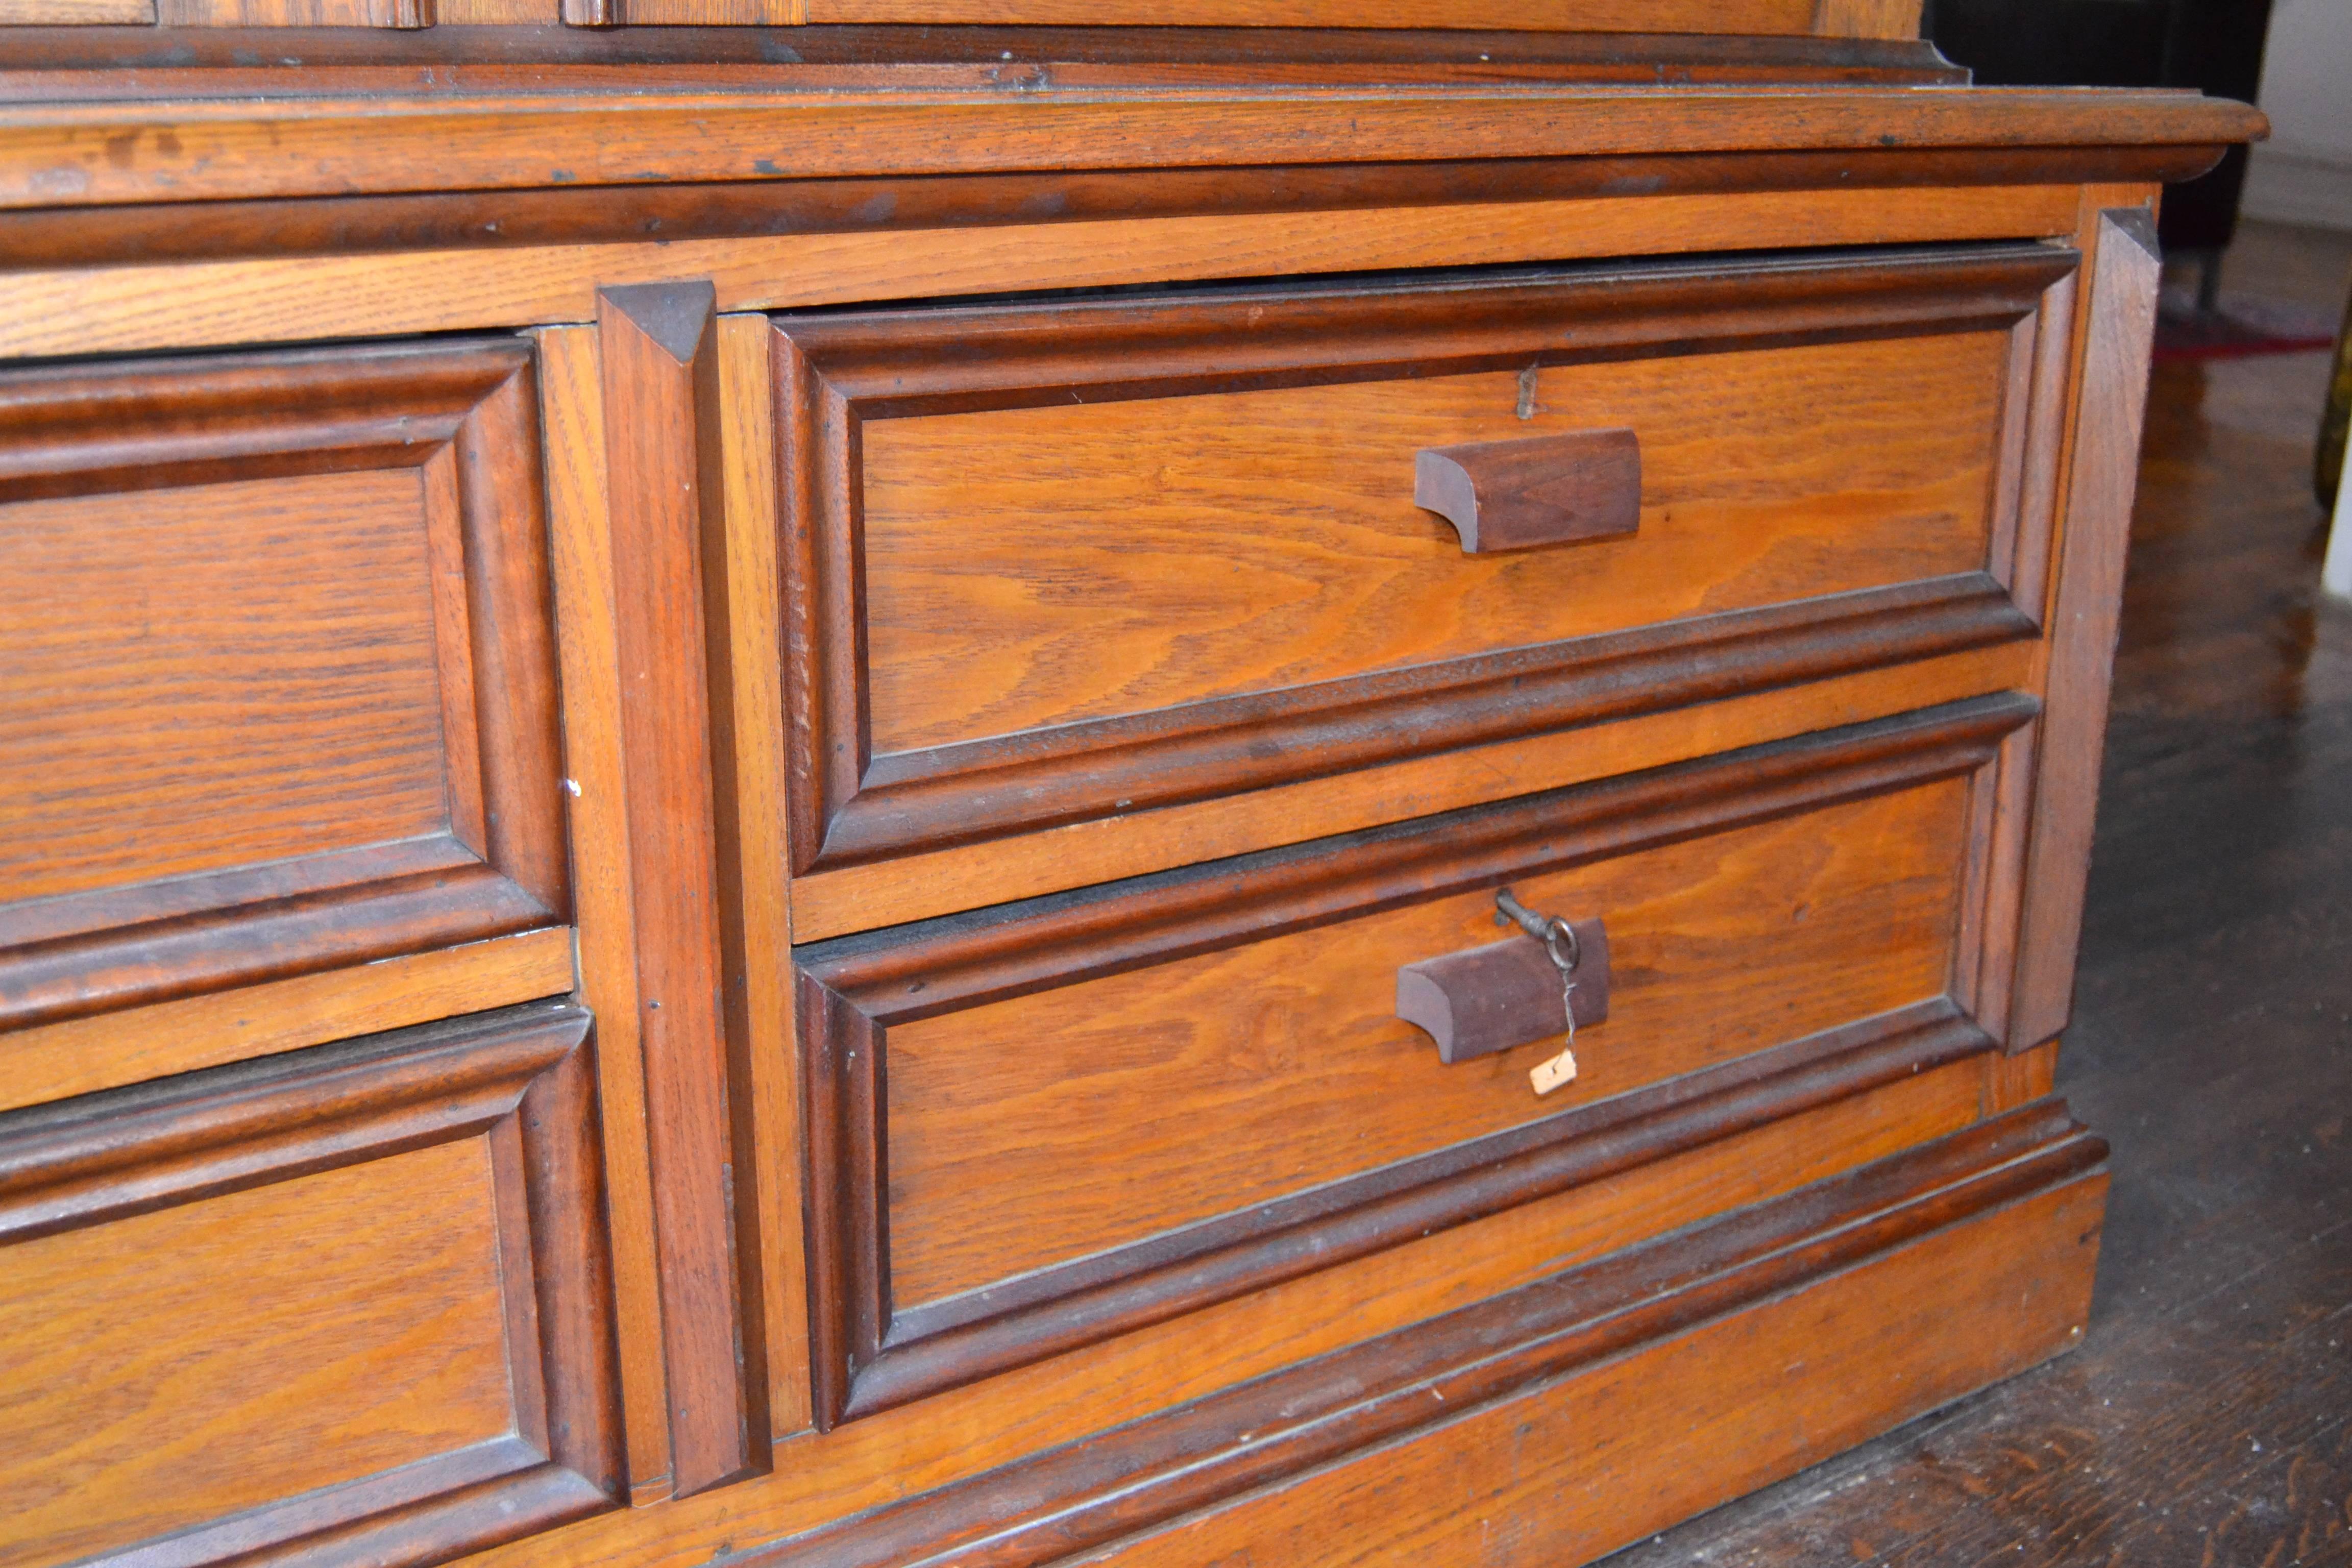 Tall and stately custom built 19th century glazed cabinet with drawers constructed of American Chestnut. Stenciled on the back is 